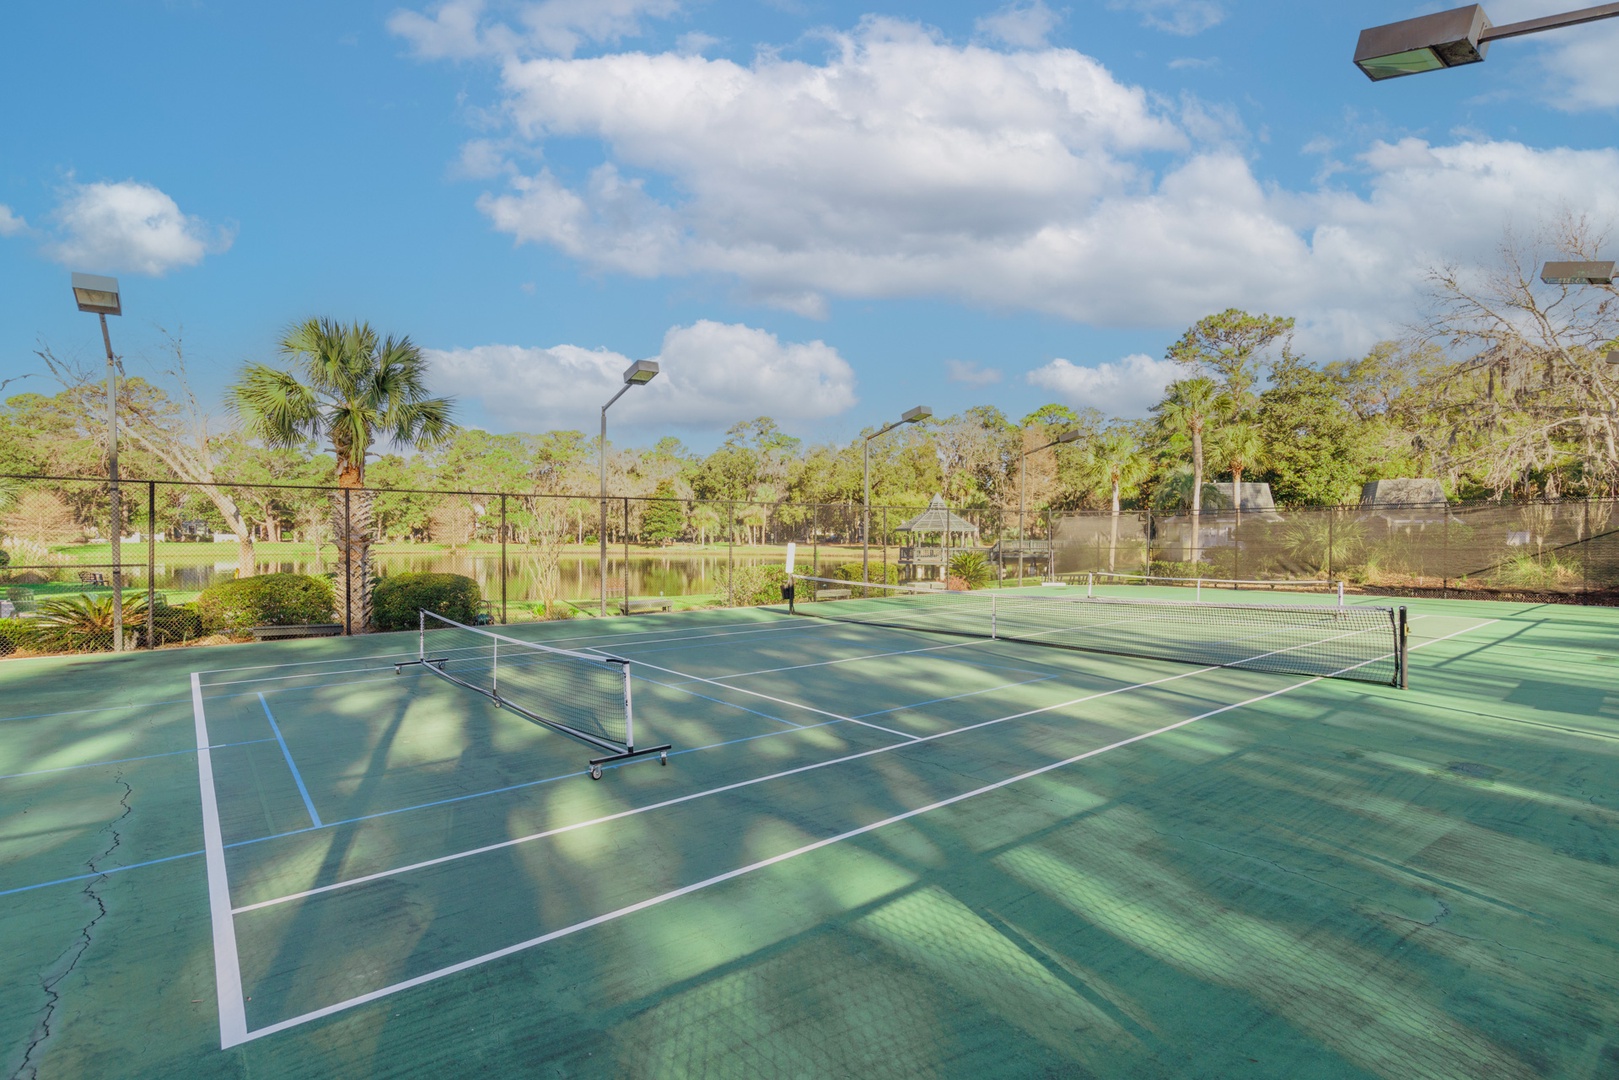 Game, set, match! Enjoy a day on the courts